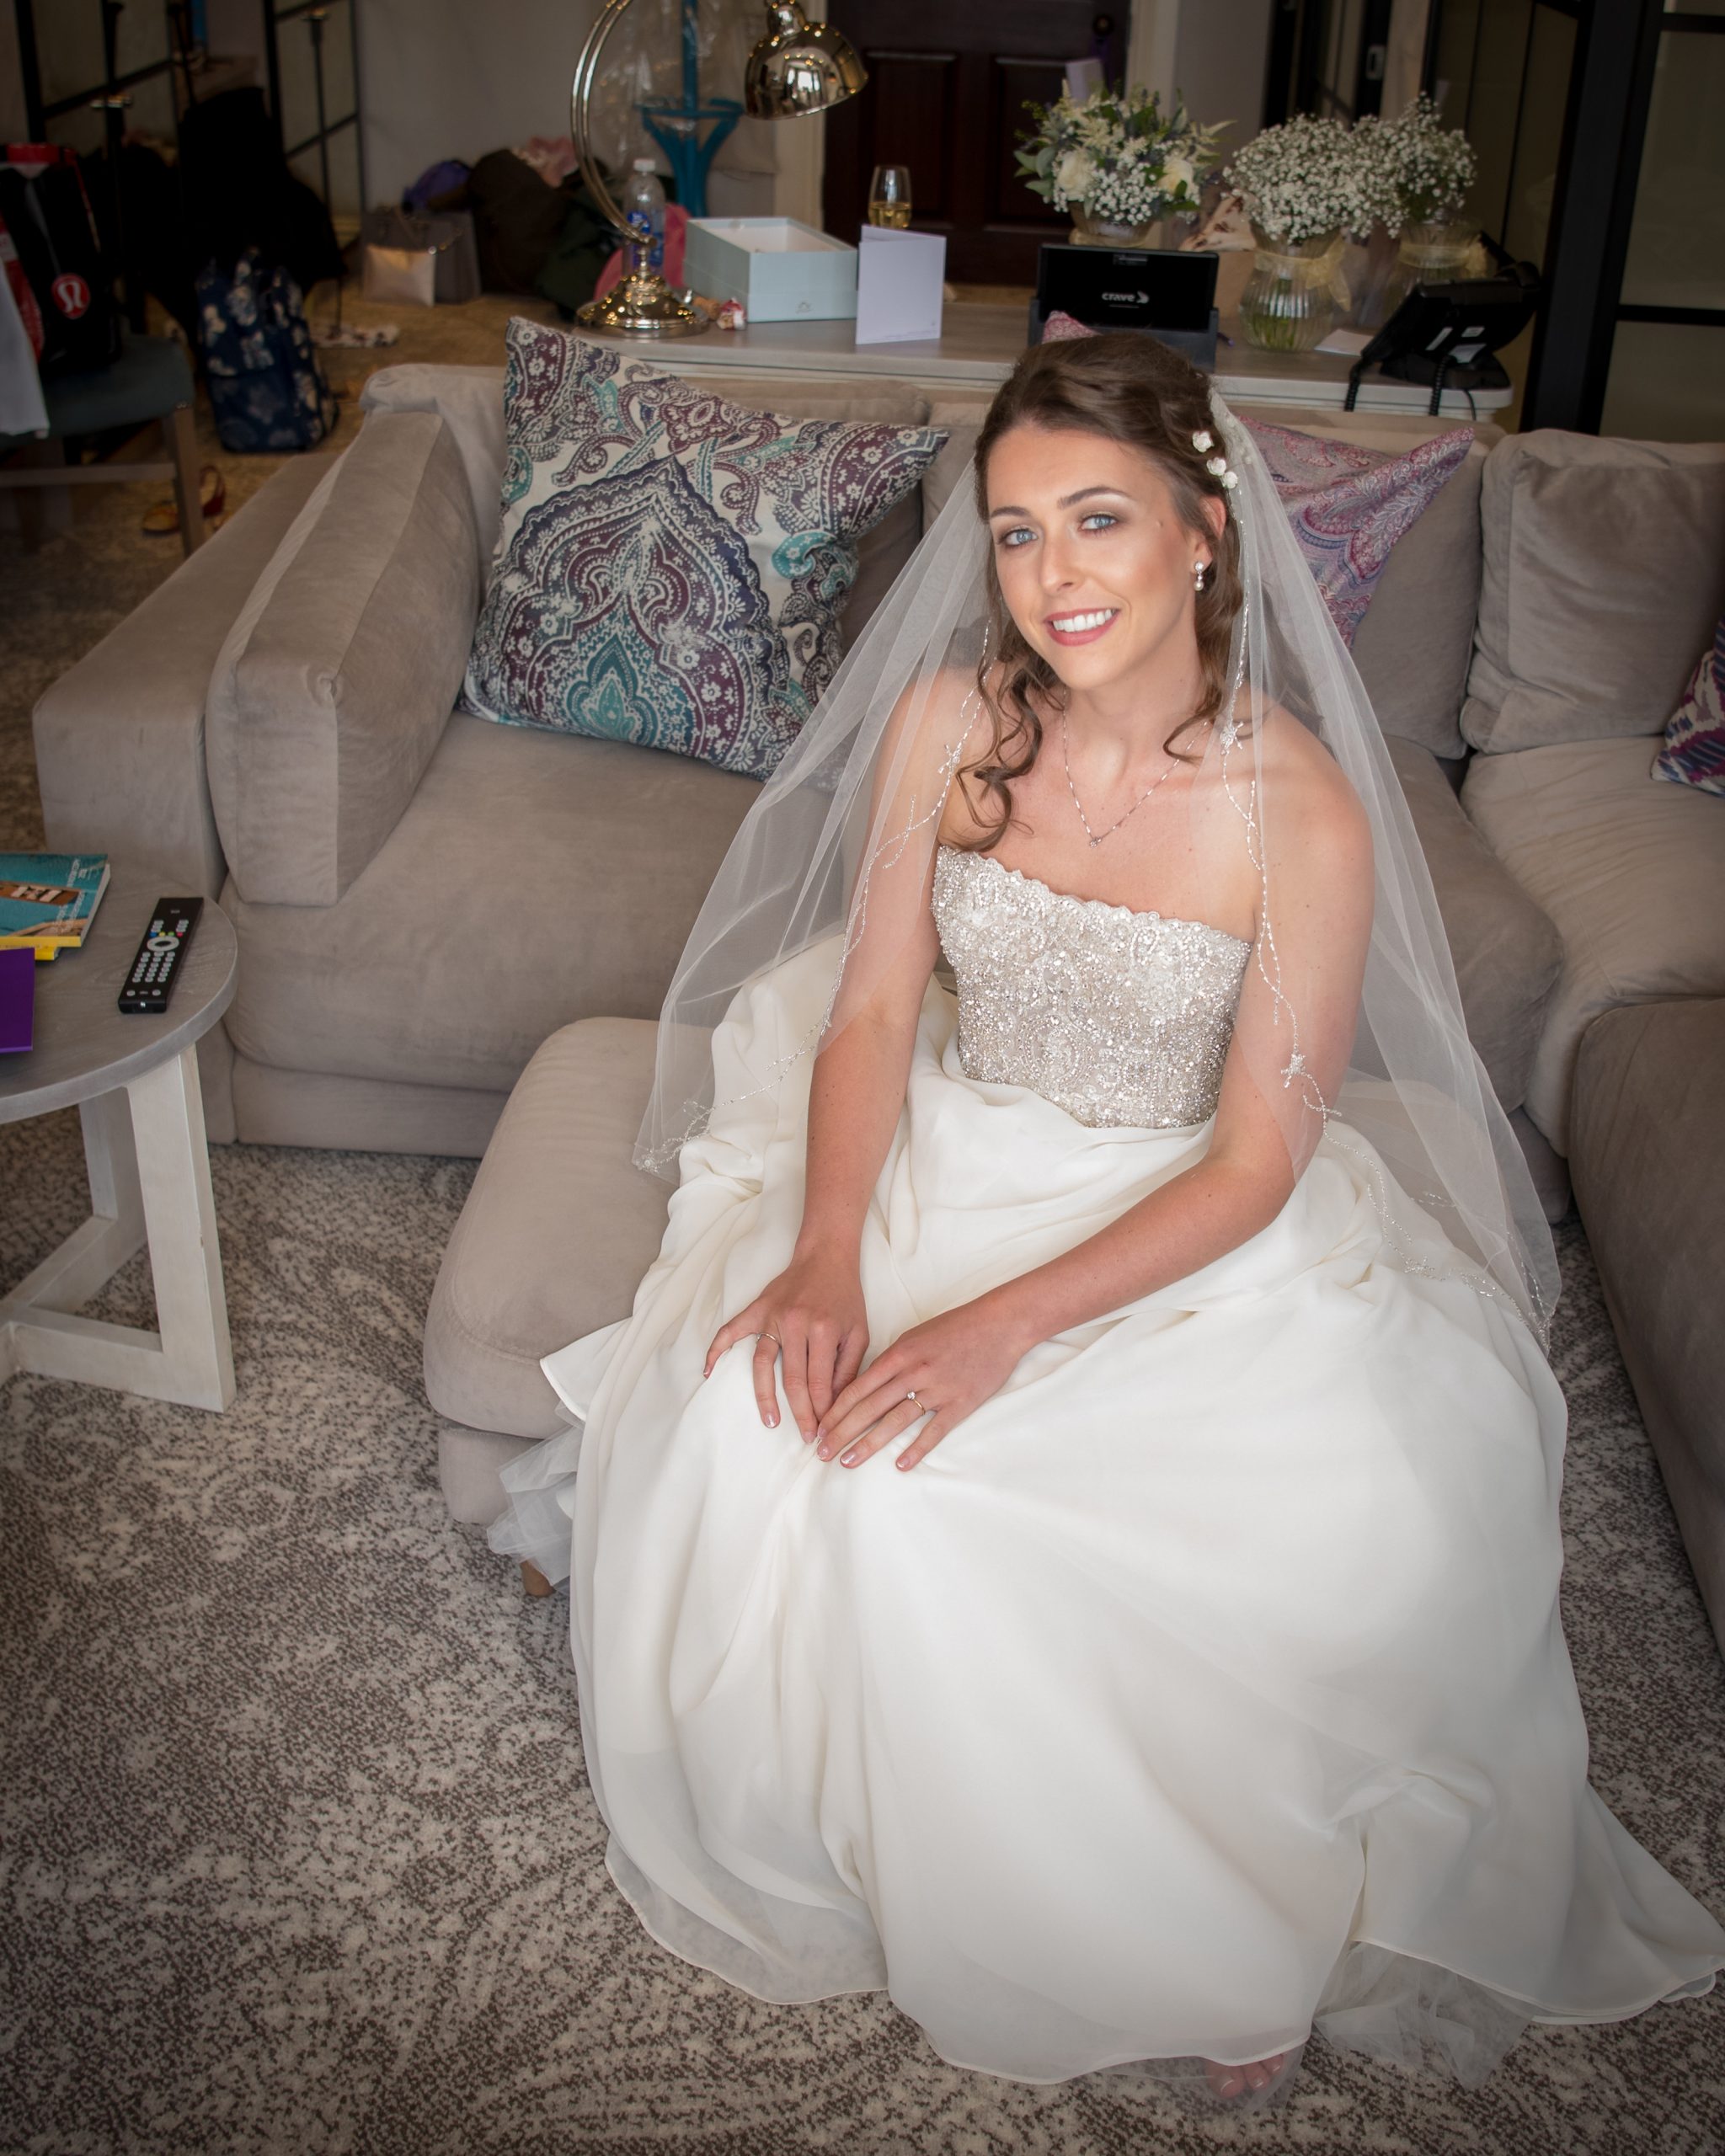 Things to make sure you capture for your bridal preparation photos